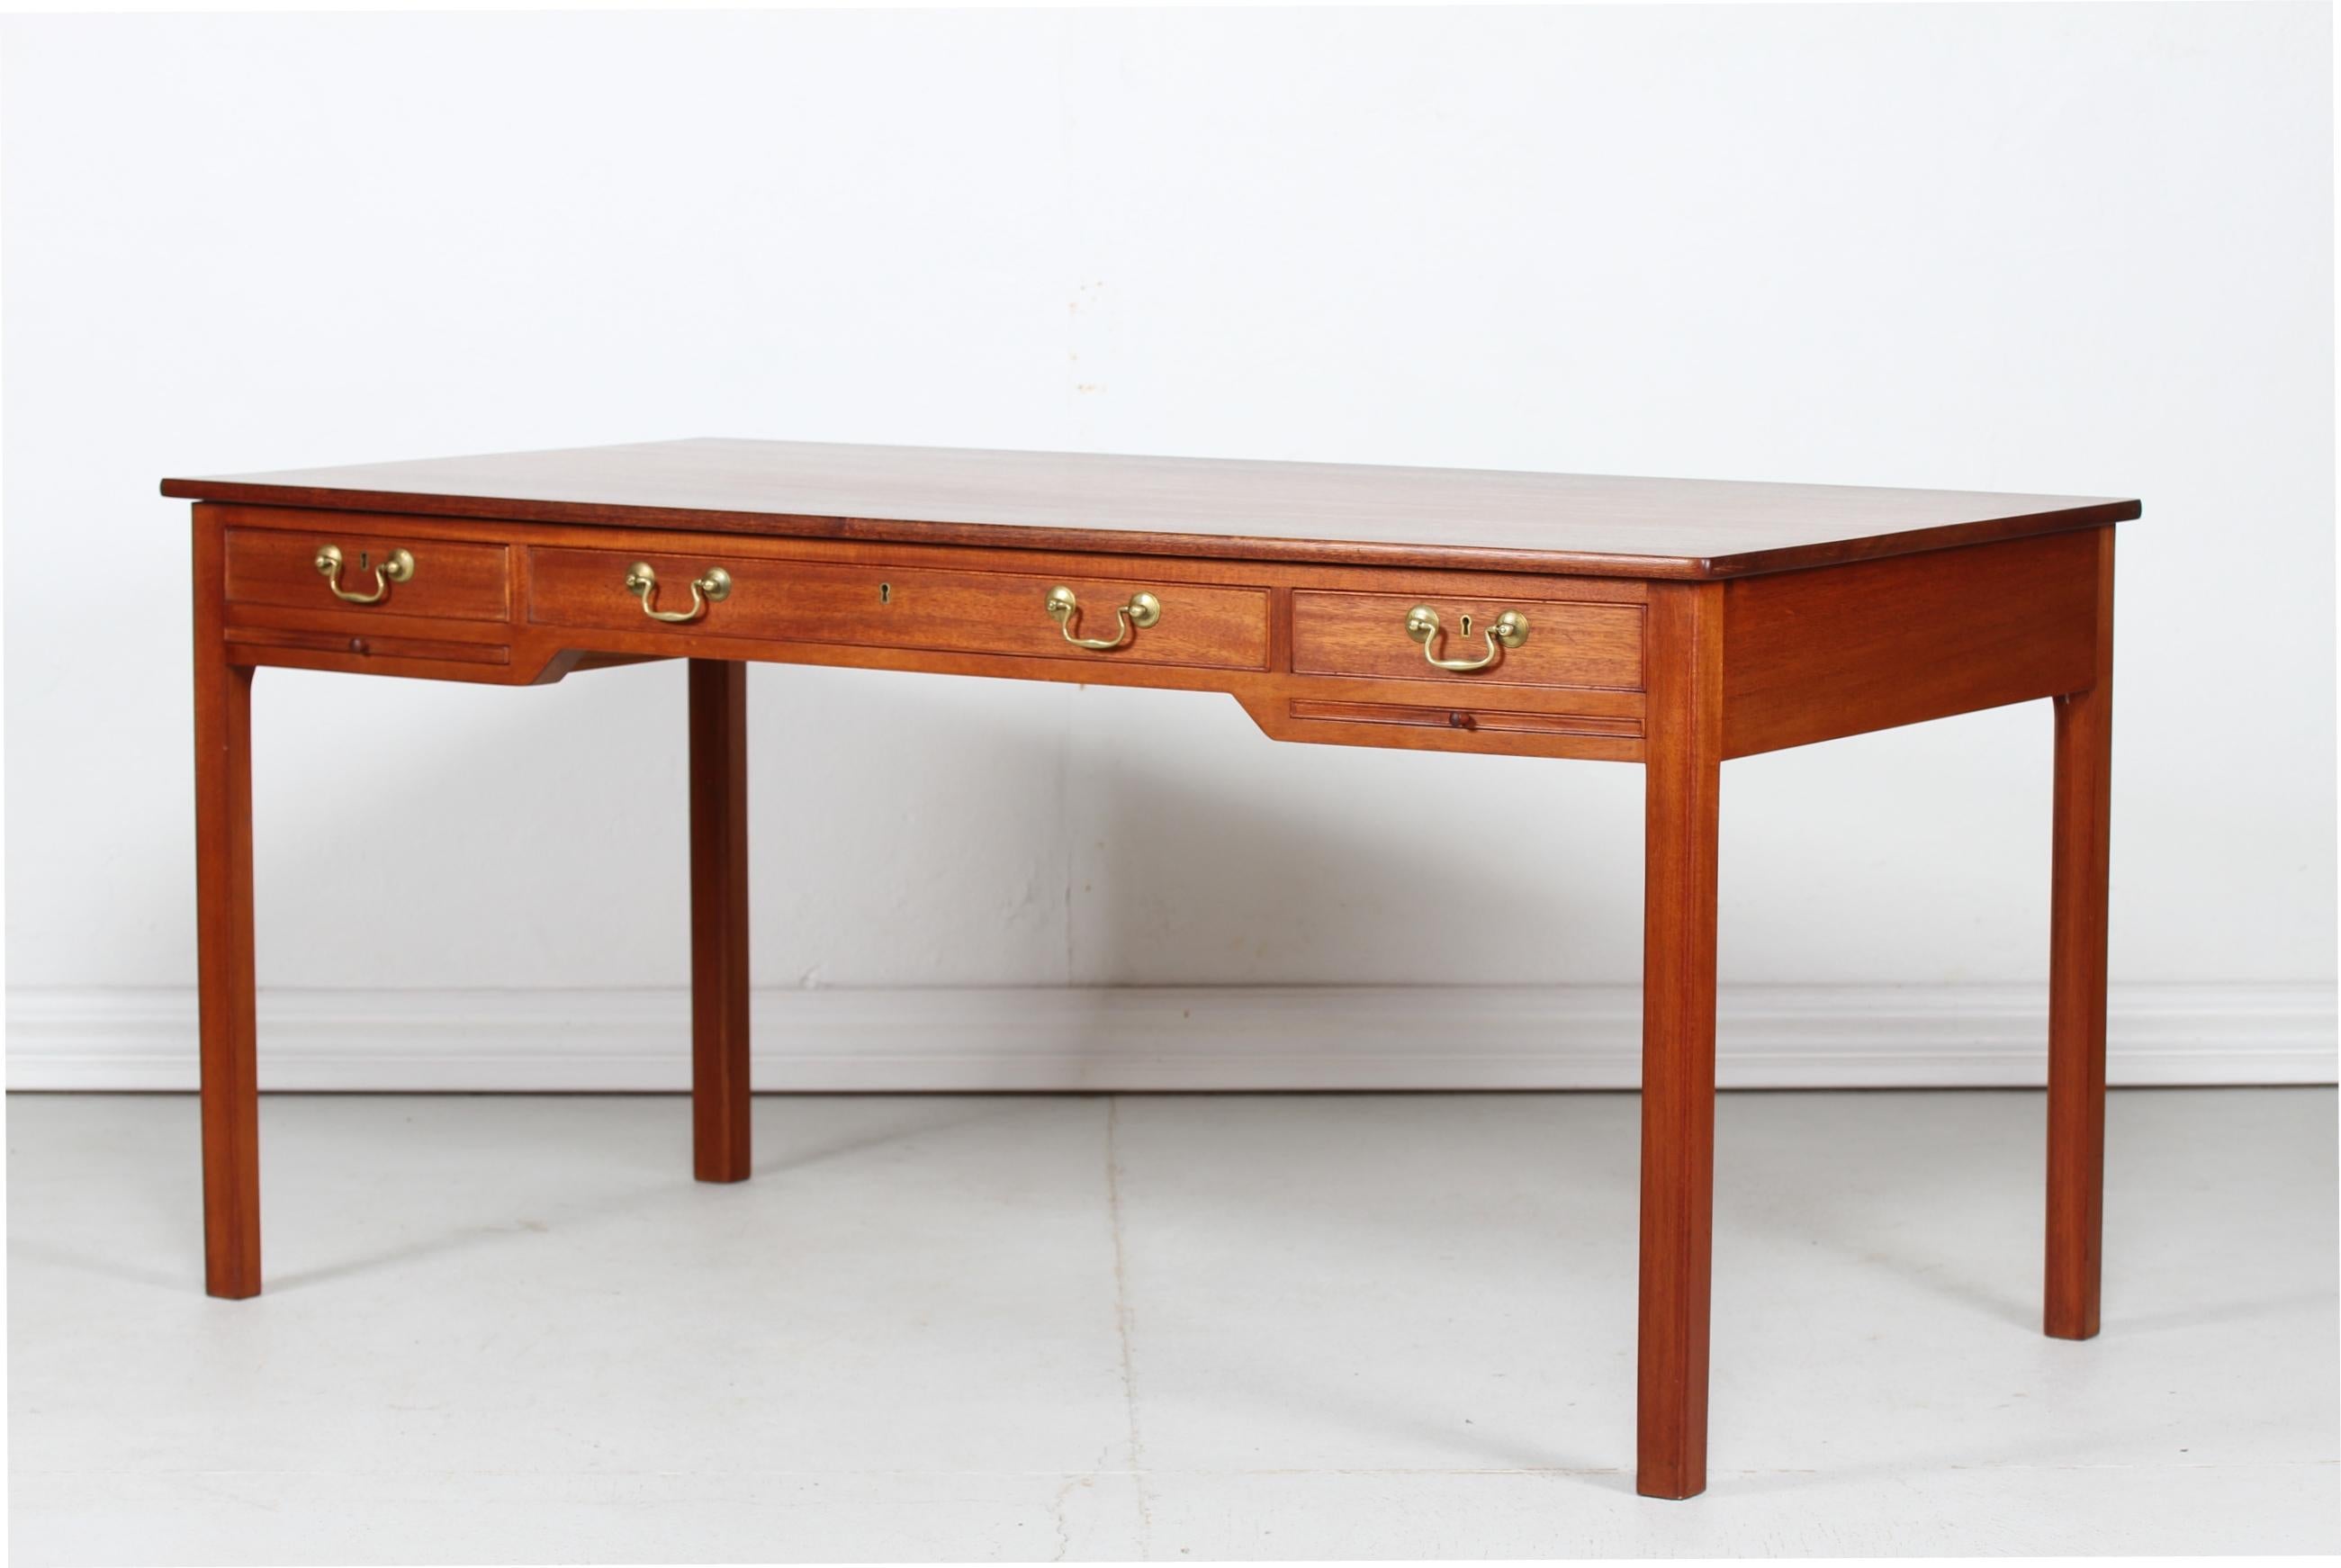 Large writing desk with drawers by the Danish architect and furniture designer Kaare Klint (1888-1954) Manufactured by Rud Rasmussen in Copenhagen
The desk is made of solid mahogany and mahogany veneer with oil treatment. 
The drawer handles are